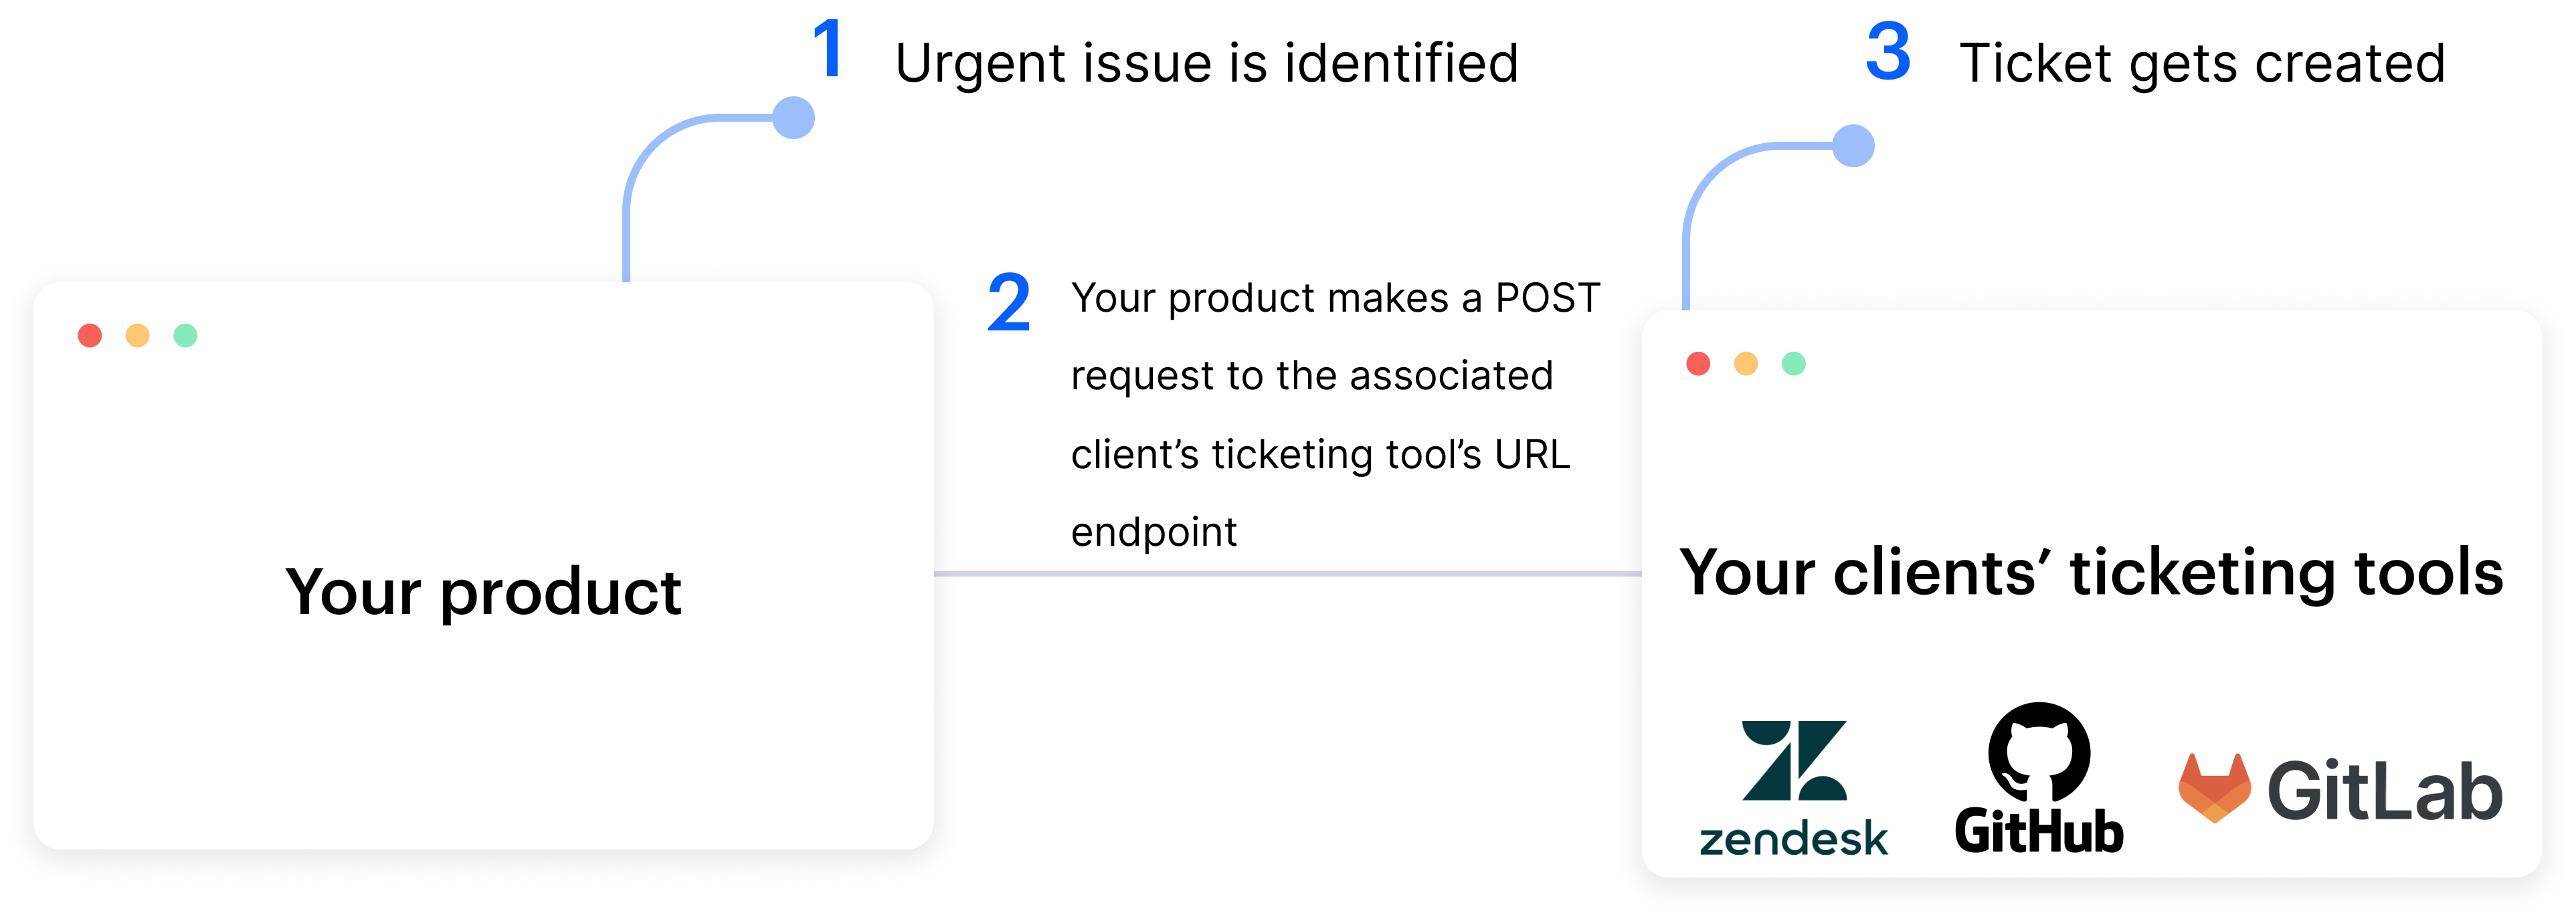 Webhook event example for creating tickets in clients' ticketing tools